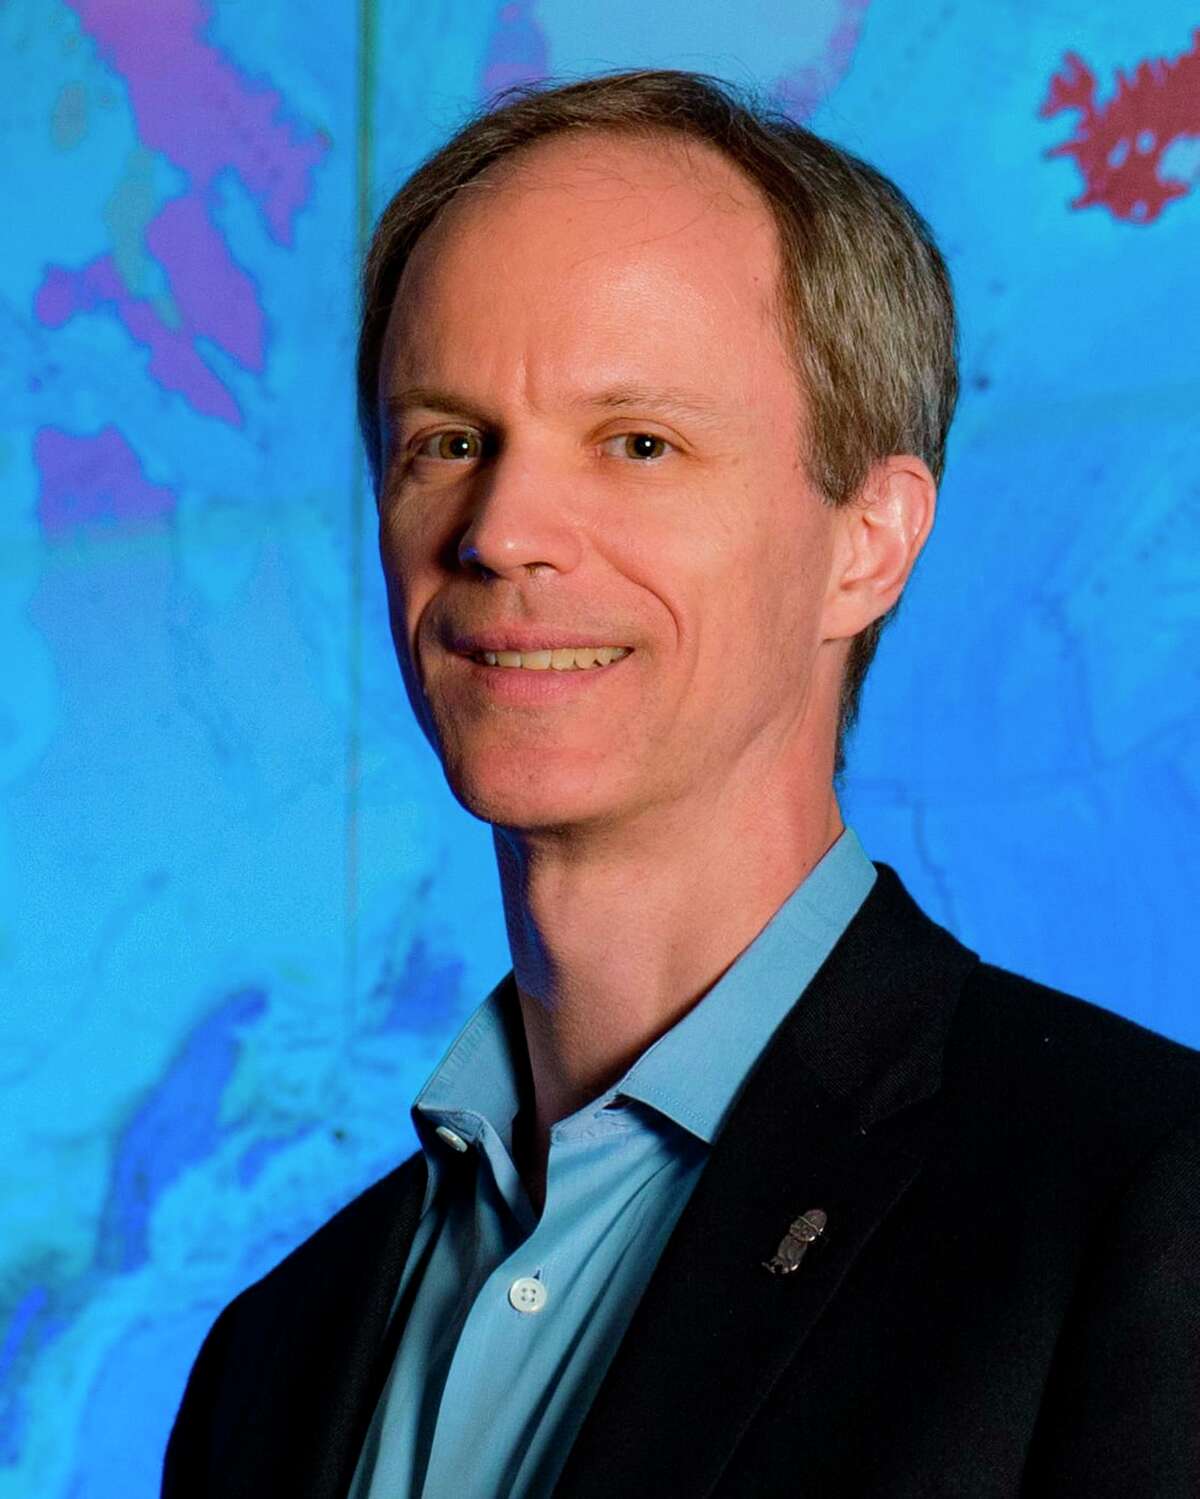 Michael Deem, seen in an undated press release image released by Rice University, was formerly the John W. Cox Professor in Biochemical and Genetic Engineering and professor of physics and astronomy at Rice University.